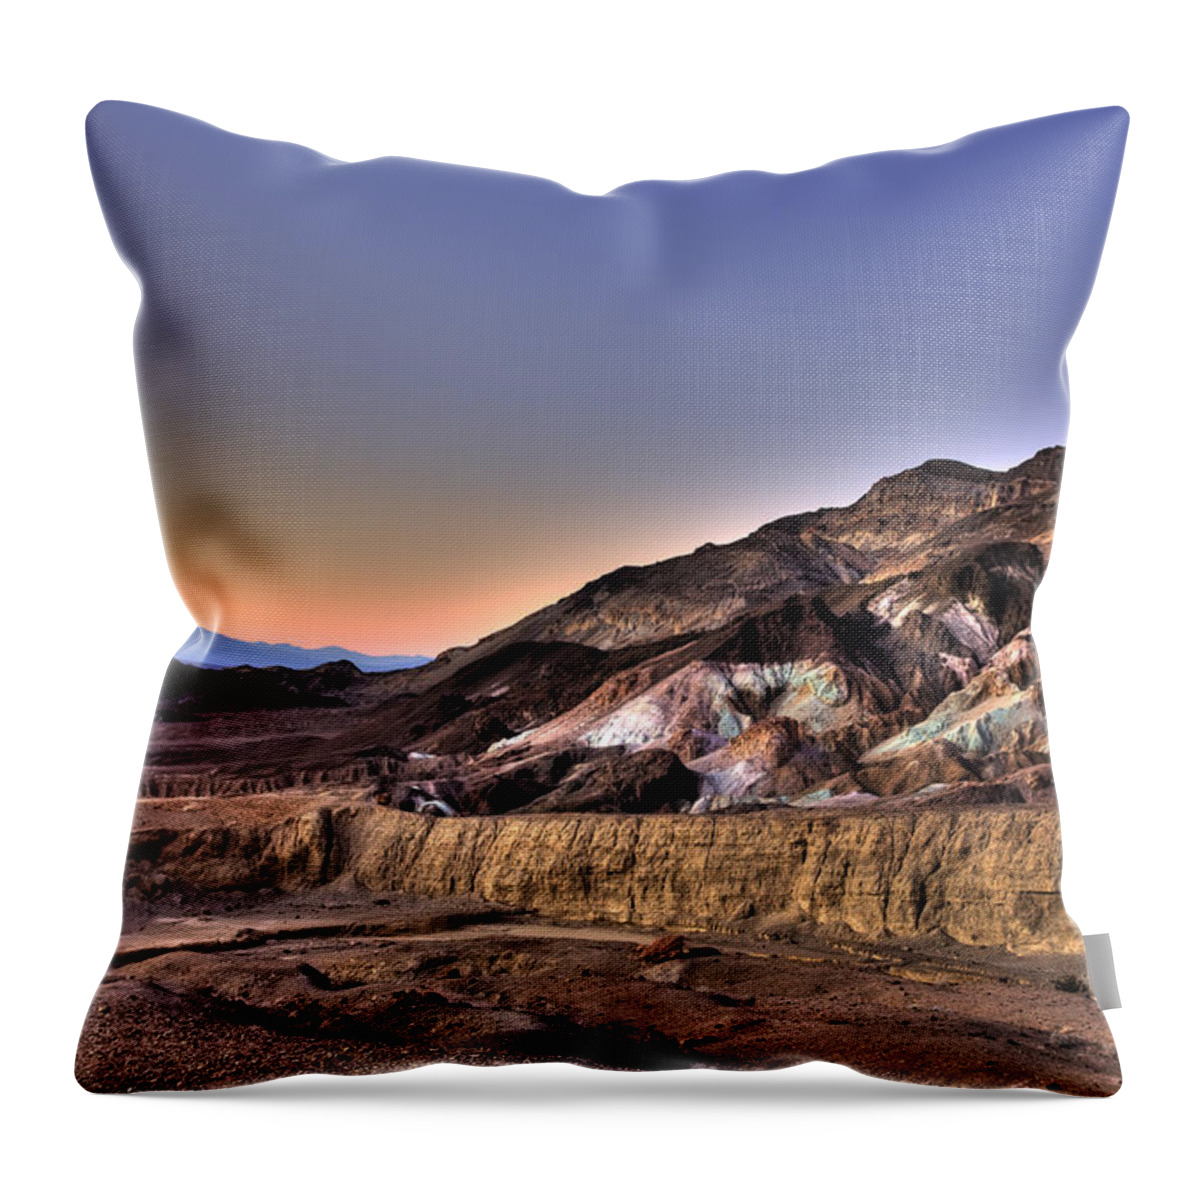 Death Valley Throw Pillow featuring the photograph Death Valley Sunset by Shawn Everhart